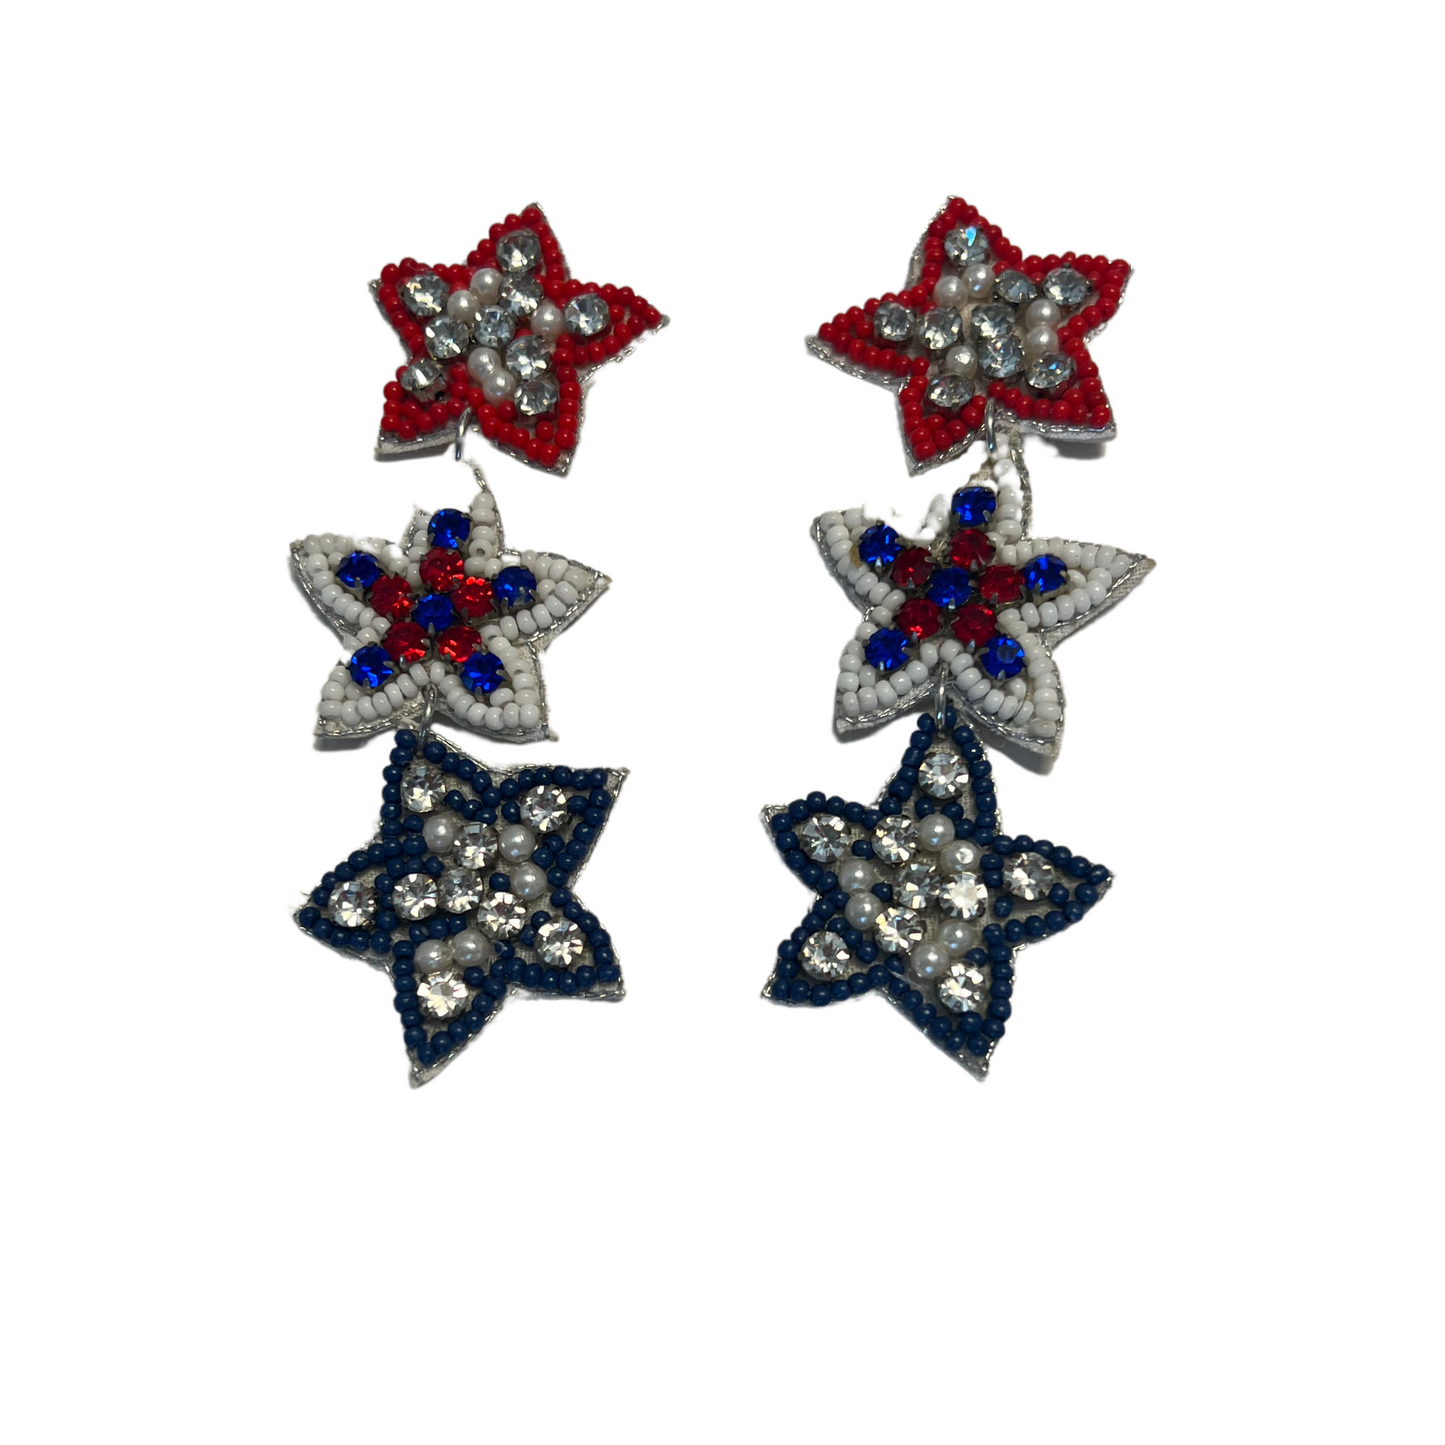 Red white and blue star dangle earrings with rhinestone accents